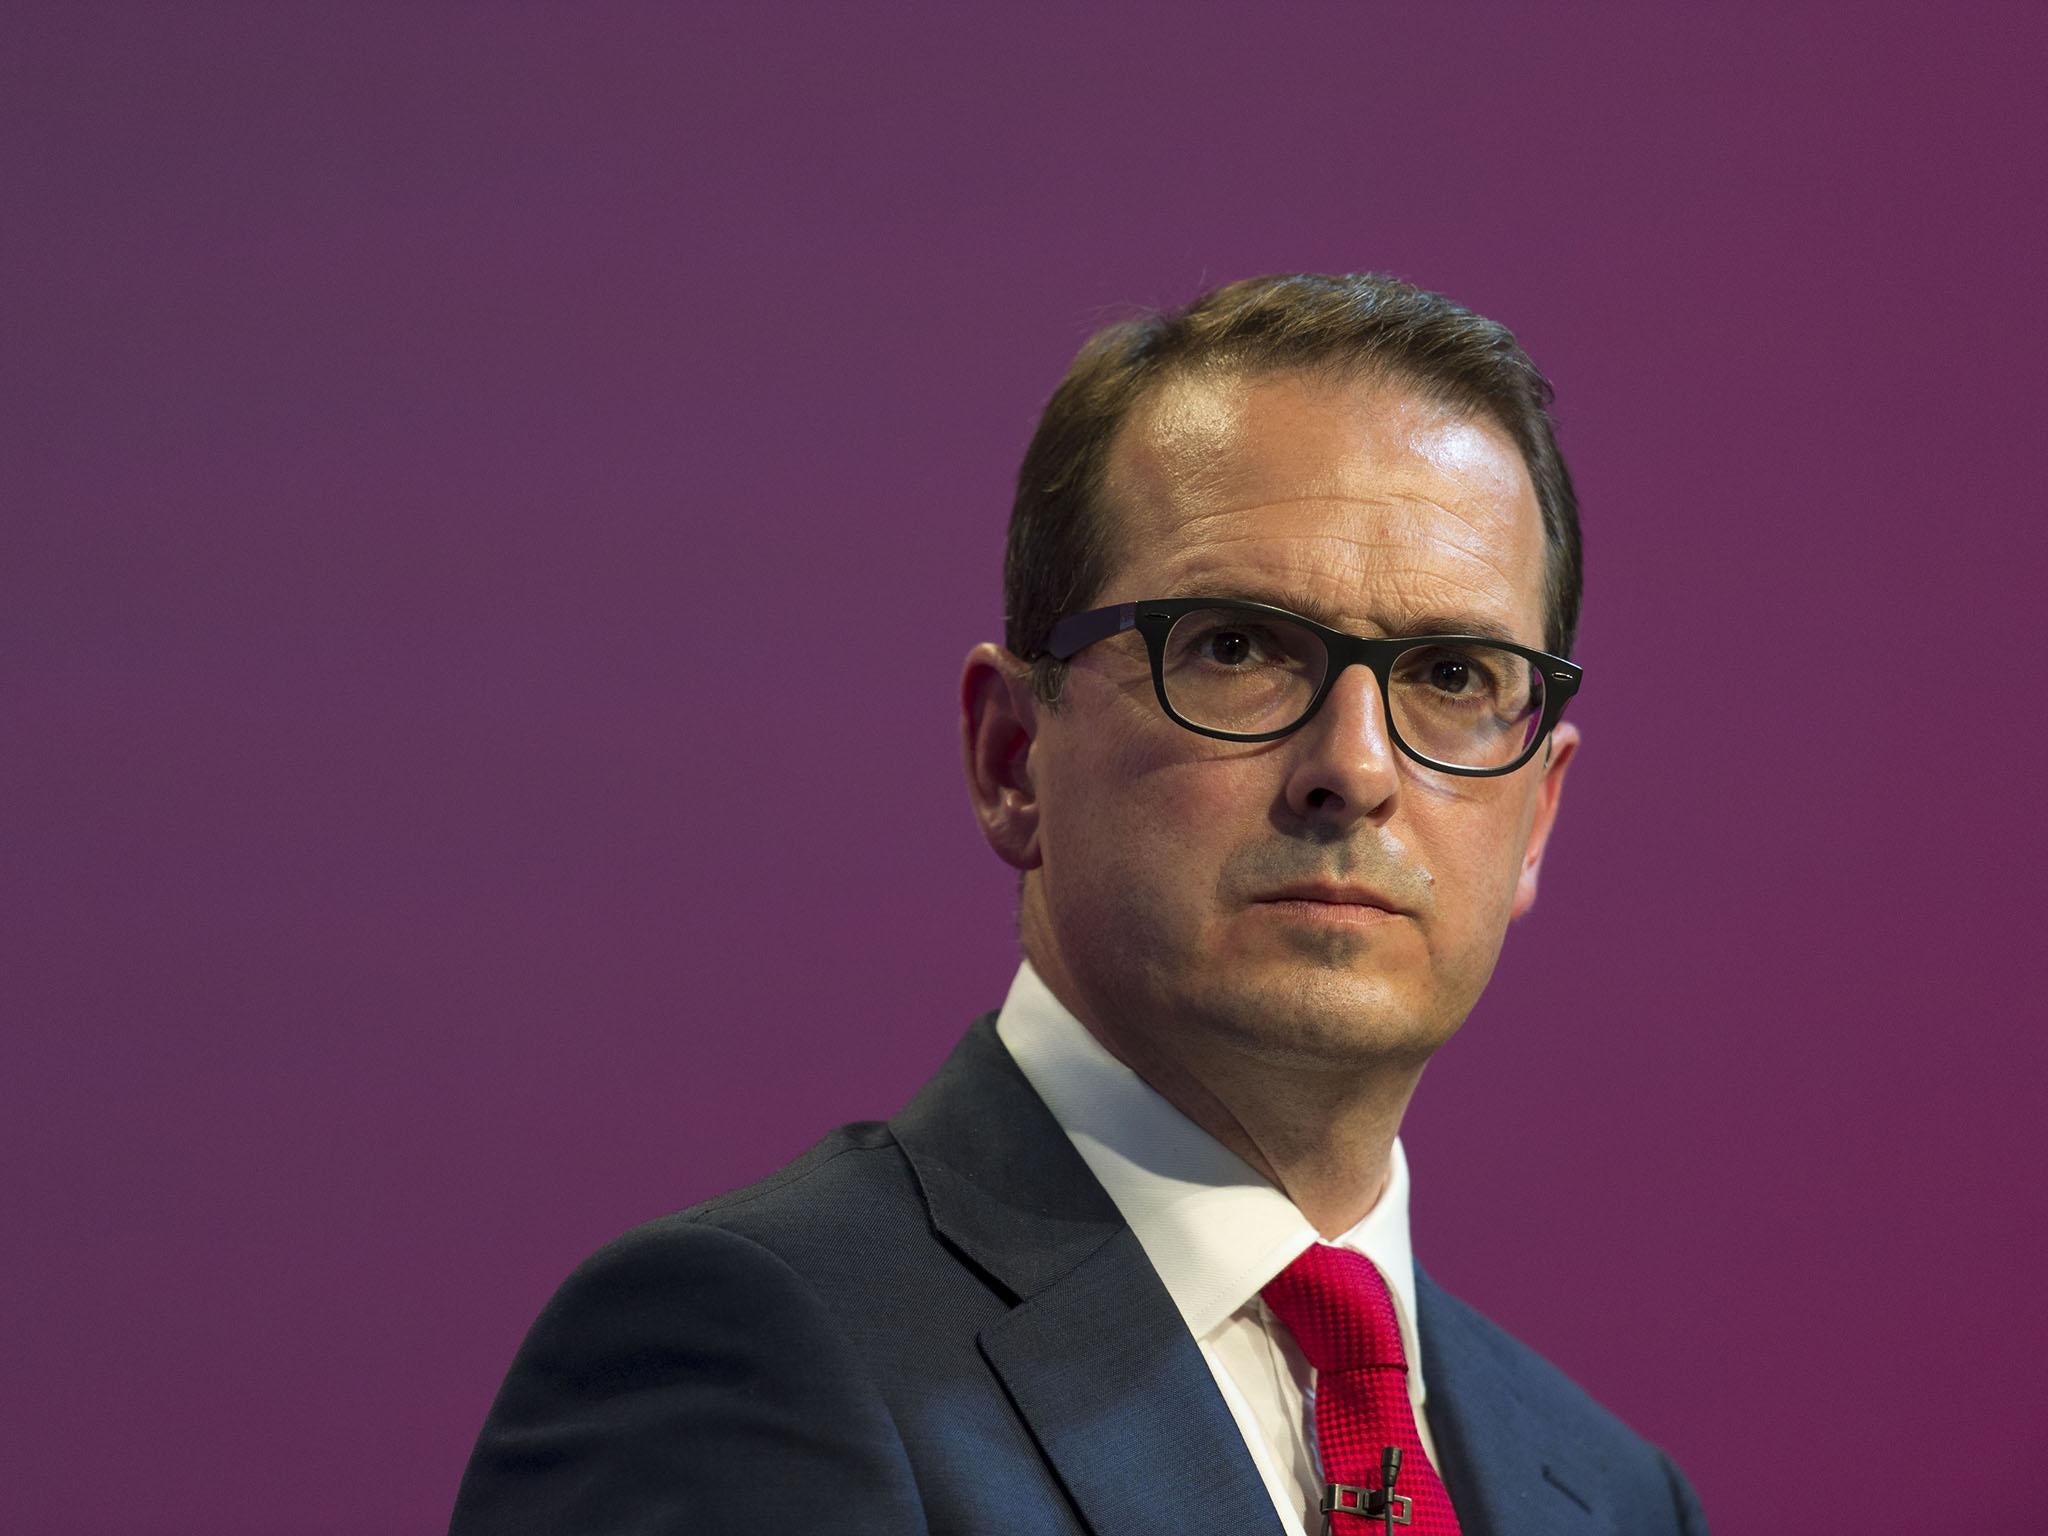 Owen Smith used a speech this week to express concern about creeping privatisation of the NHS under the Tories